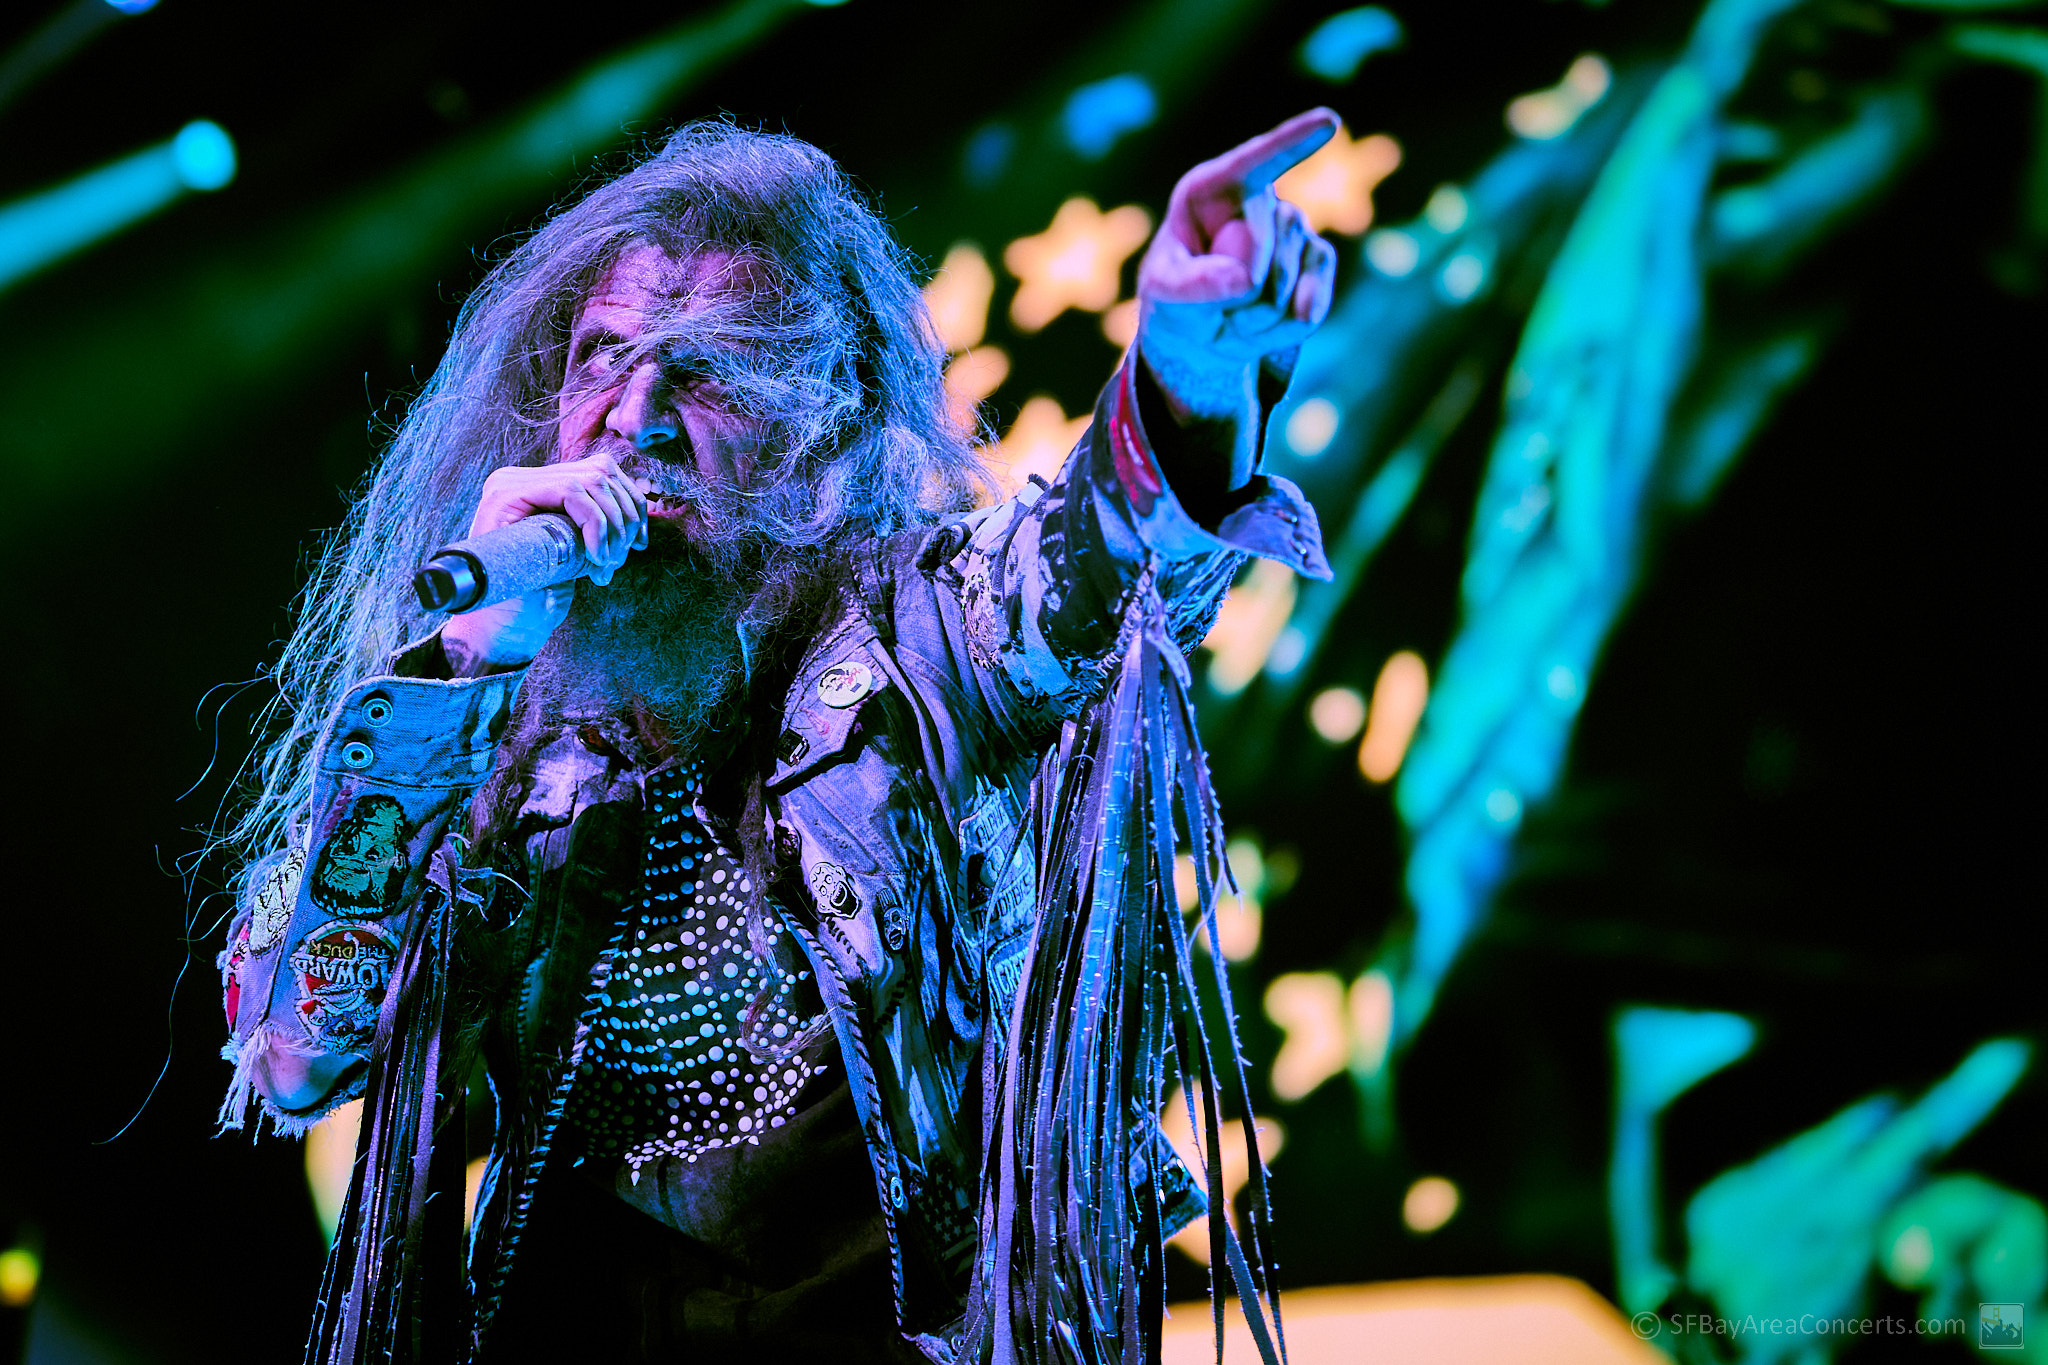 Rob Zombie @ the Concord Pavilion (Photo: Kevin Keating)